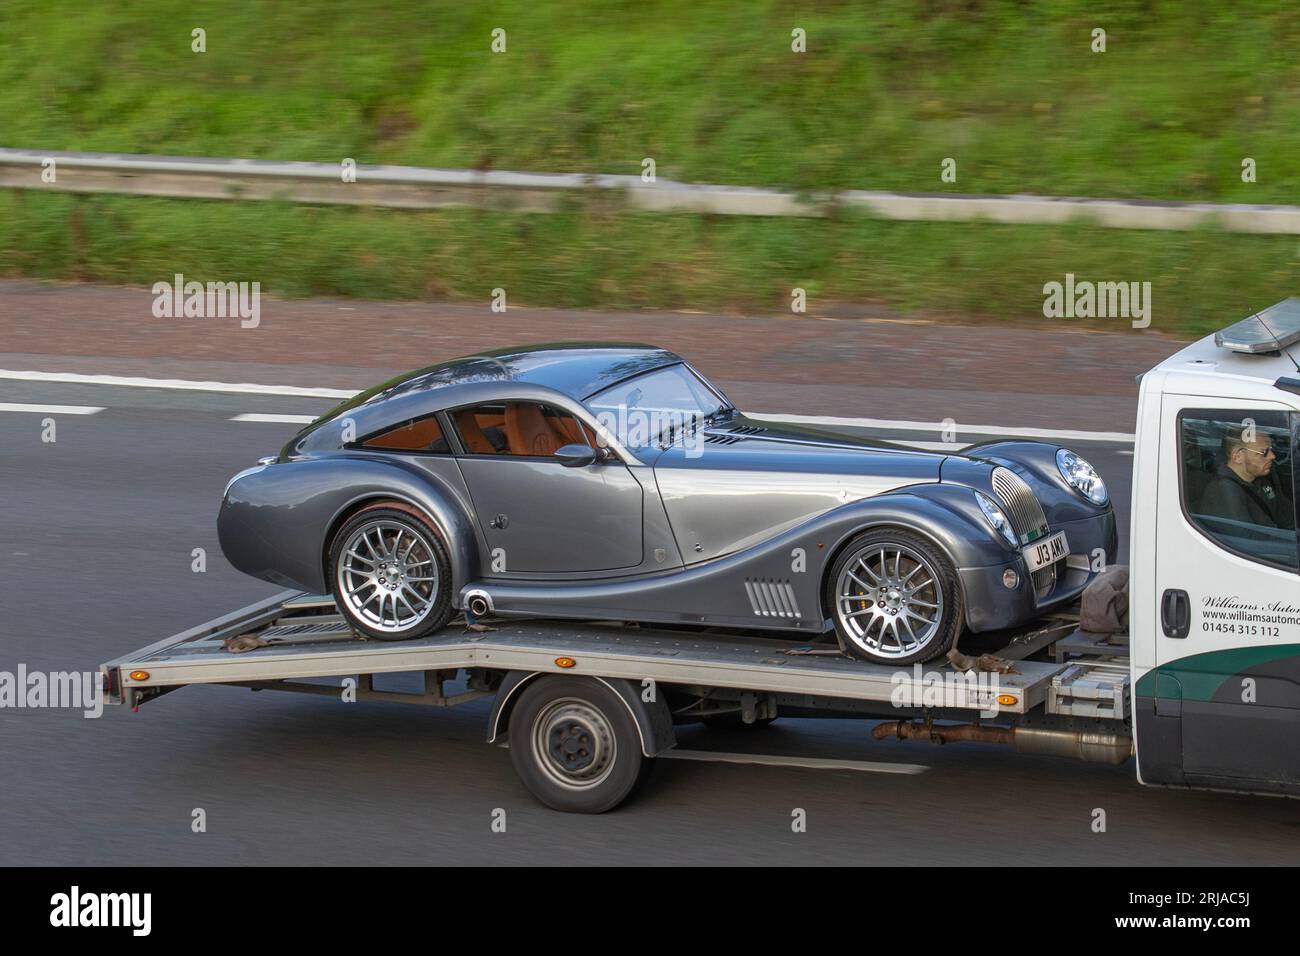 Williams Automobiles Ltd. 2009 Morgan Aeromax Coupe V8 Grey Car Coupe Petrol 4799 cc, 367Bhp 4.8 litre BMW V8 engine; British performance cars travelling on the M6 motorway in Greater Manchester, UK Stock Photo